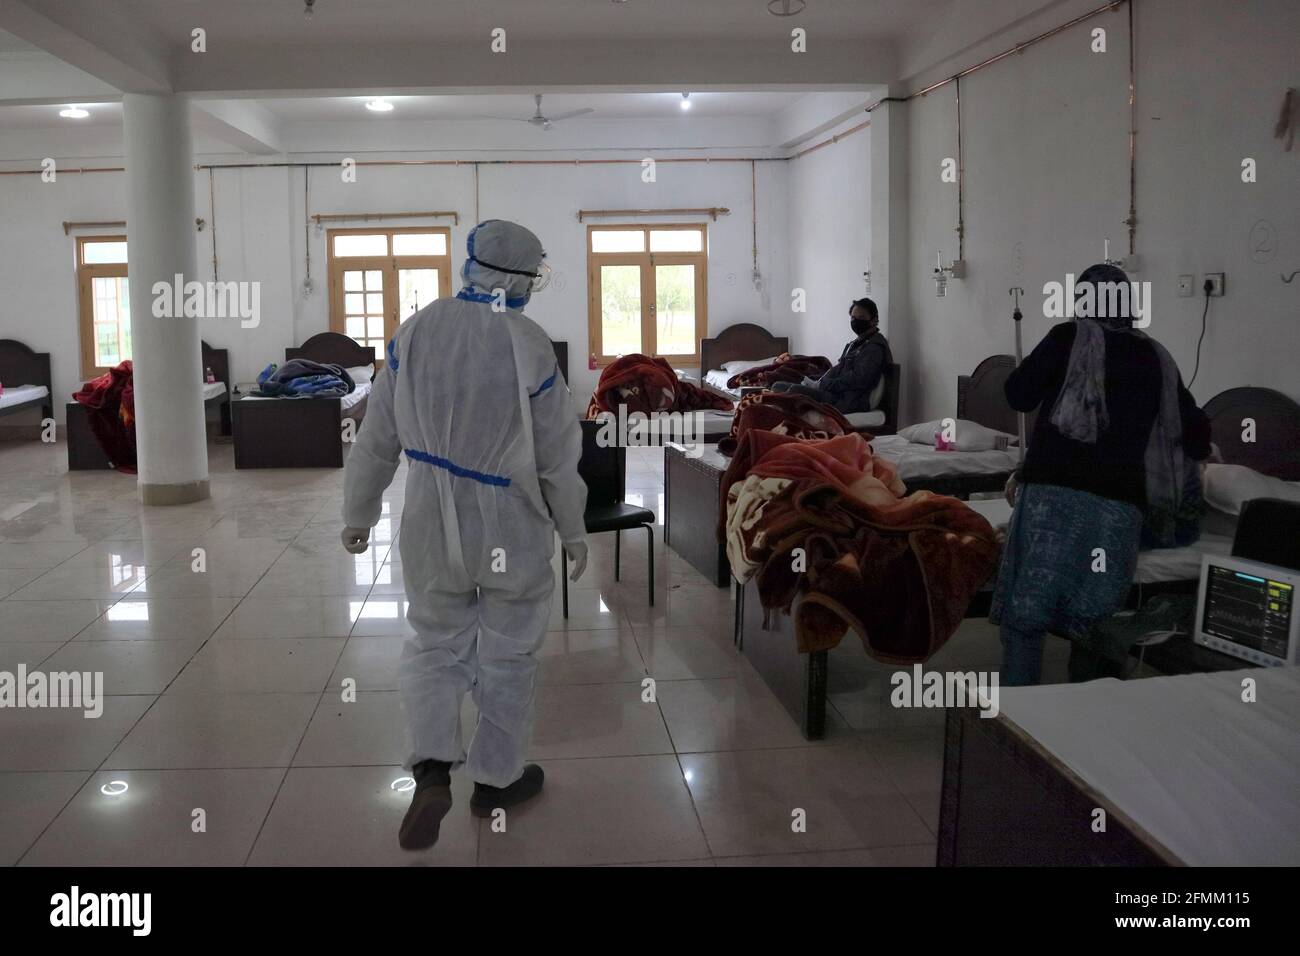 May 8, 2021: A Health worker examins Covid-19 patients at a temporary Covid-19 hospital in Srinagar, Indian Administered Kashmir on 08 May 2021. A Local NGO Athrout has converted Hajj house into a 100-bedded Covid centre as the space in hospitals is filling up fast Credit: Muzamil Mattoo/IMAGESLIVE/ZUMA Wire/Alamy Live News Stock Photo